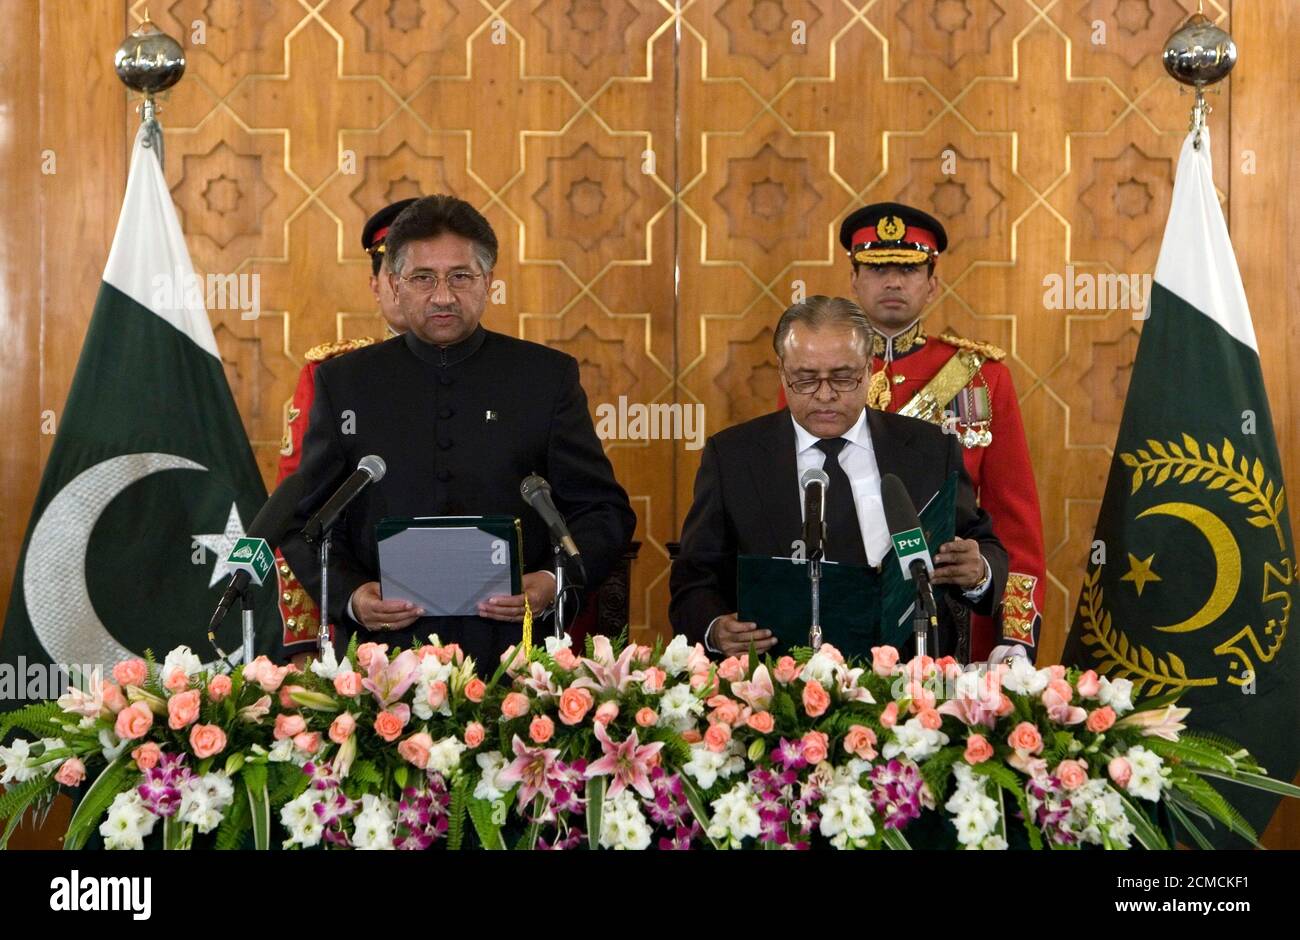 Pakistan's President Pervez Musharraf (L) is sworn in by Chief Justice Abdul Hameed Dogar at the President House in Islamabad November 29, 2007. Musharraf was sworn in for a second term on Thursday, but this as a civilian leader a day after quitting as army chief and fulfilling a promise many Pakistanis doubted he would keep. REUTERS/Adrees Latif    (PAKISTAN) Stock Photo